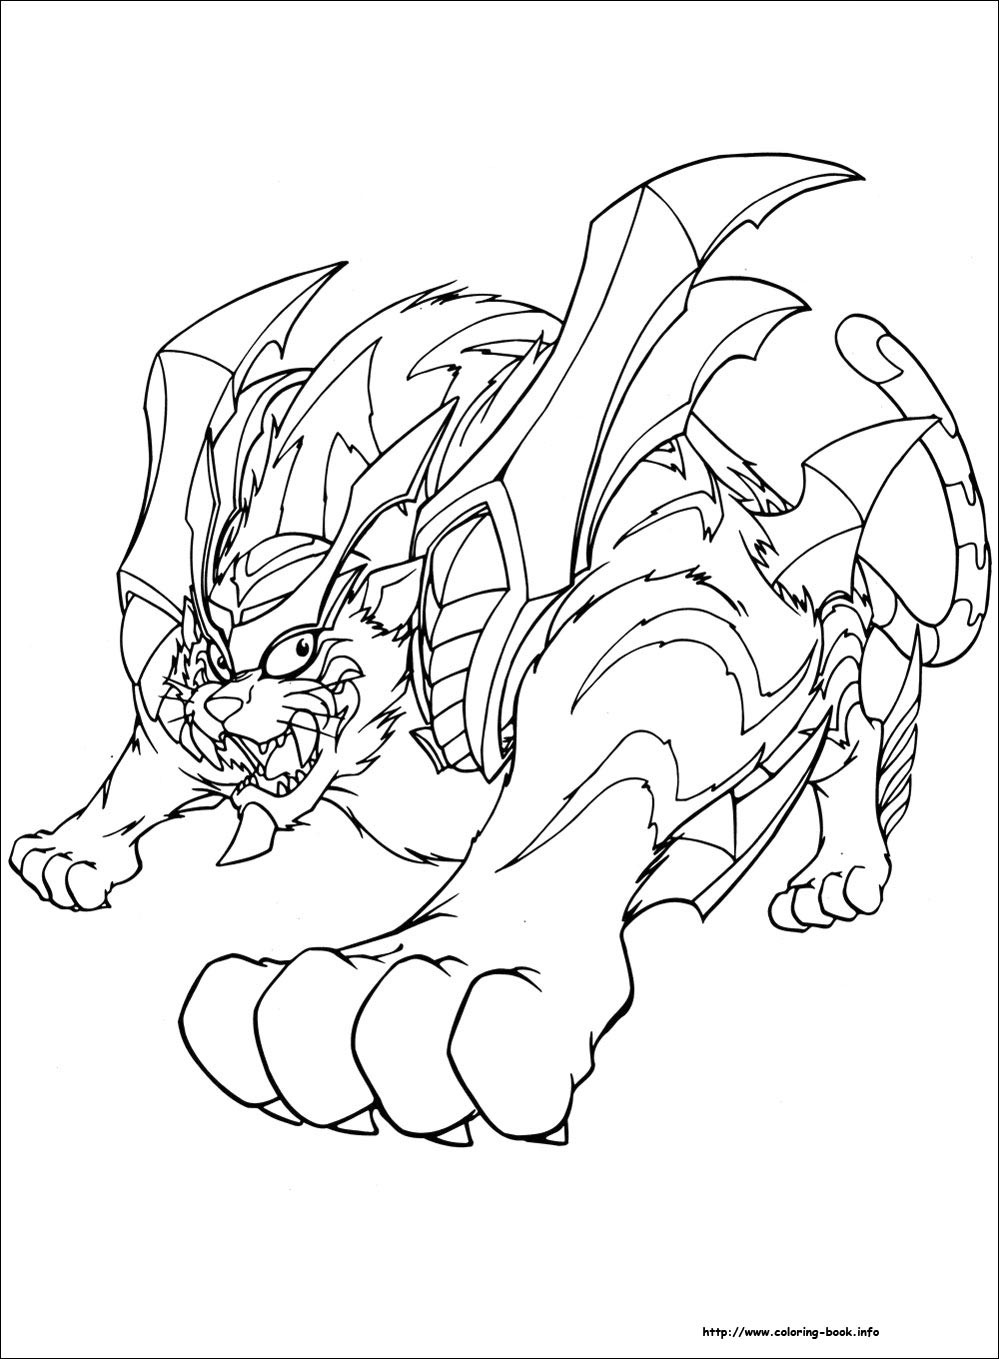 coloring : Beyblade Coloring Pages Elegant Beyblade Coloring Picture Beyblade  Coloring Pages ~ queens